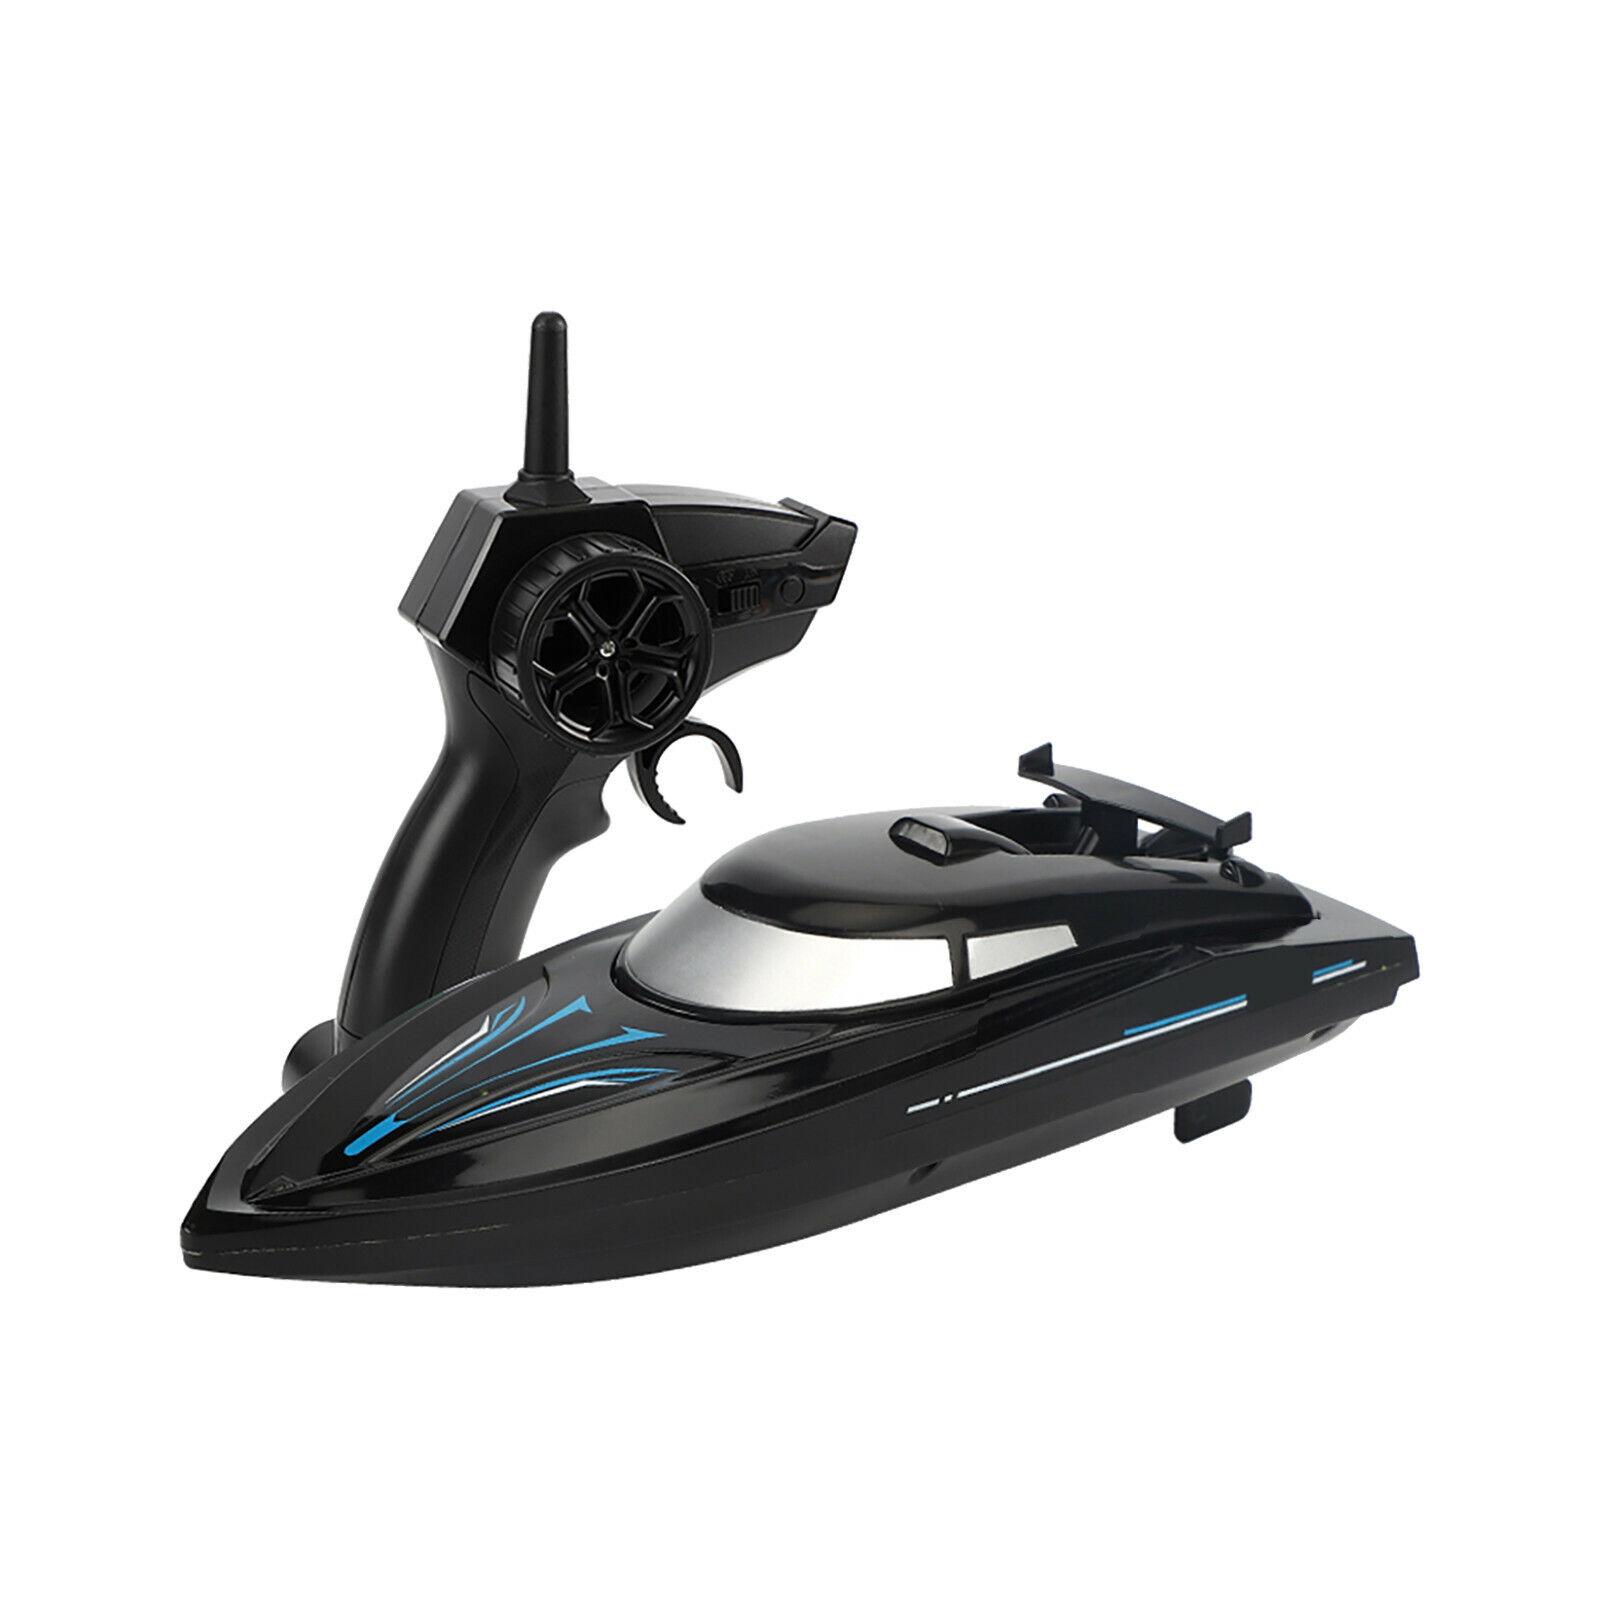 1/4 Rc Boat: Top Models of 1/4 RC Boats for All Levels